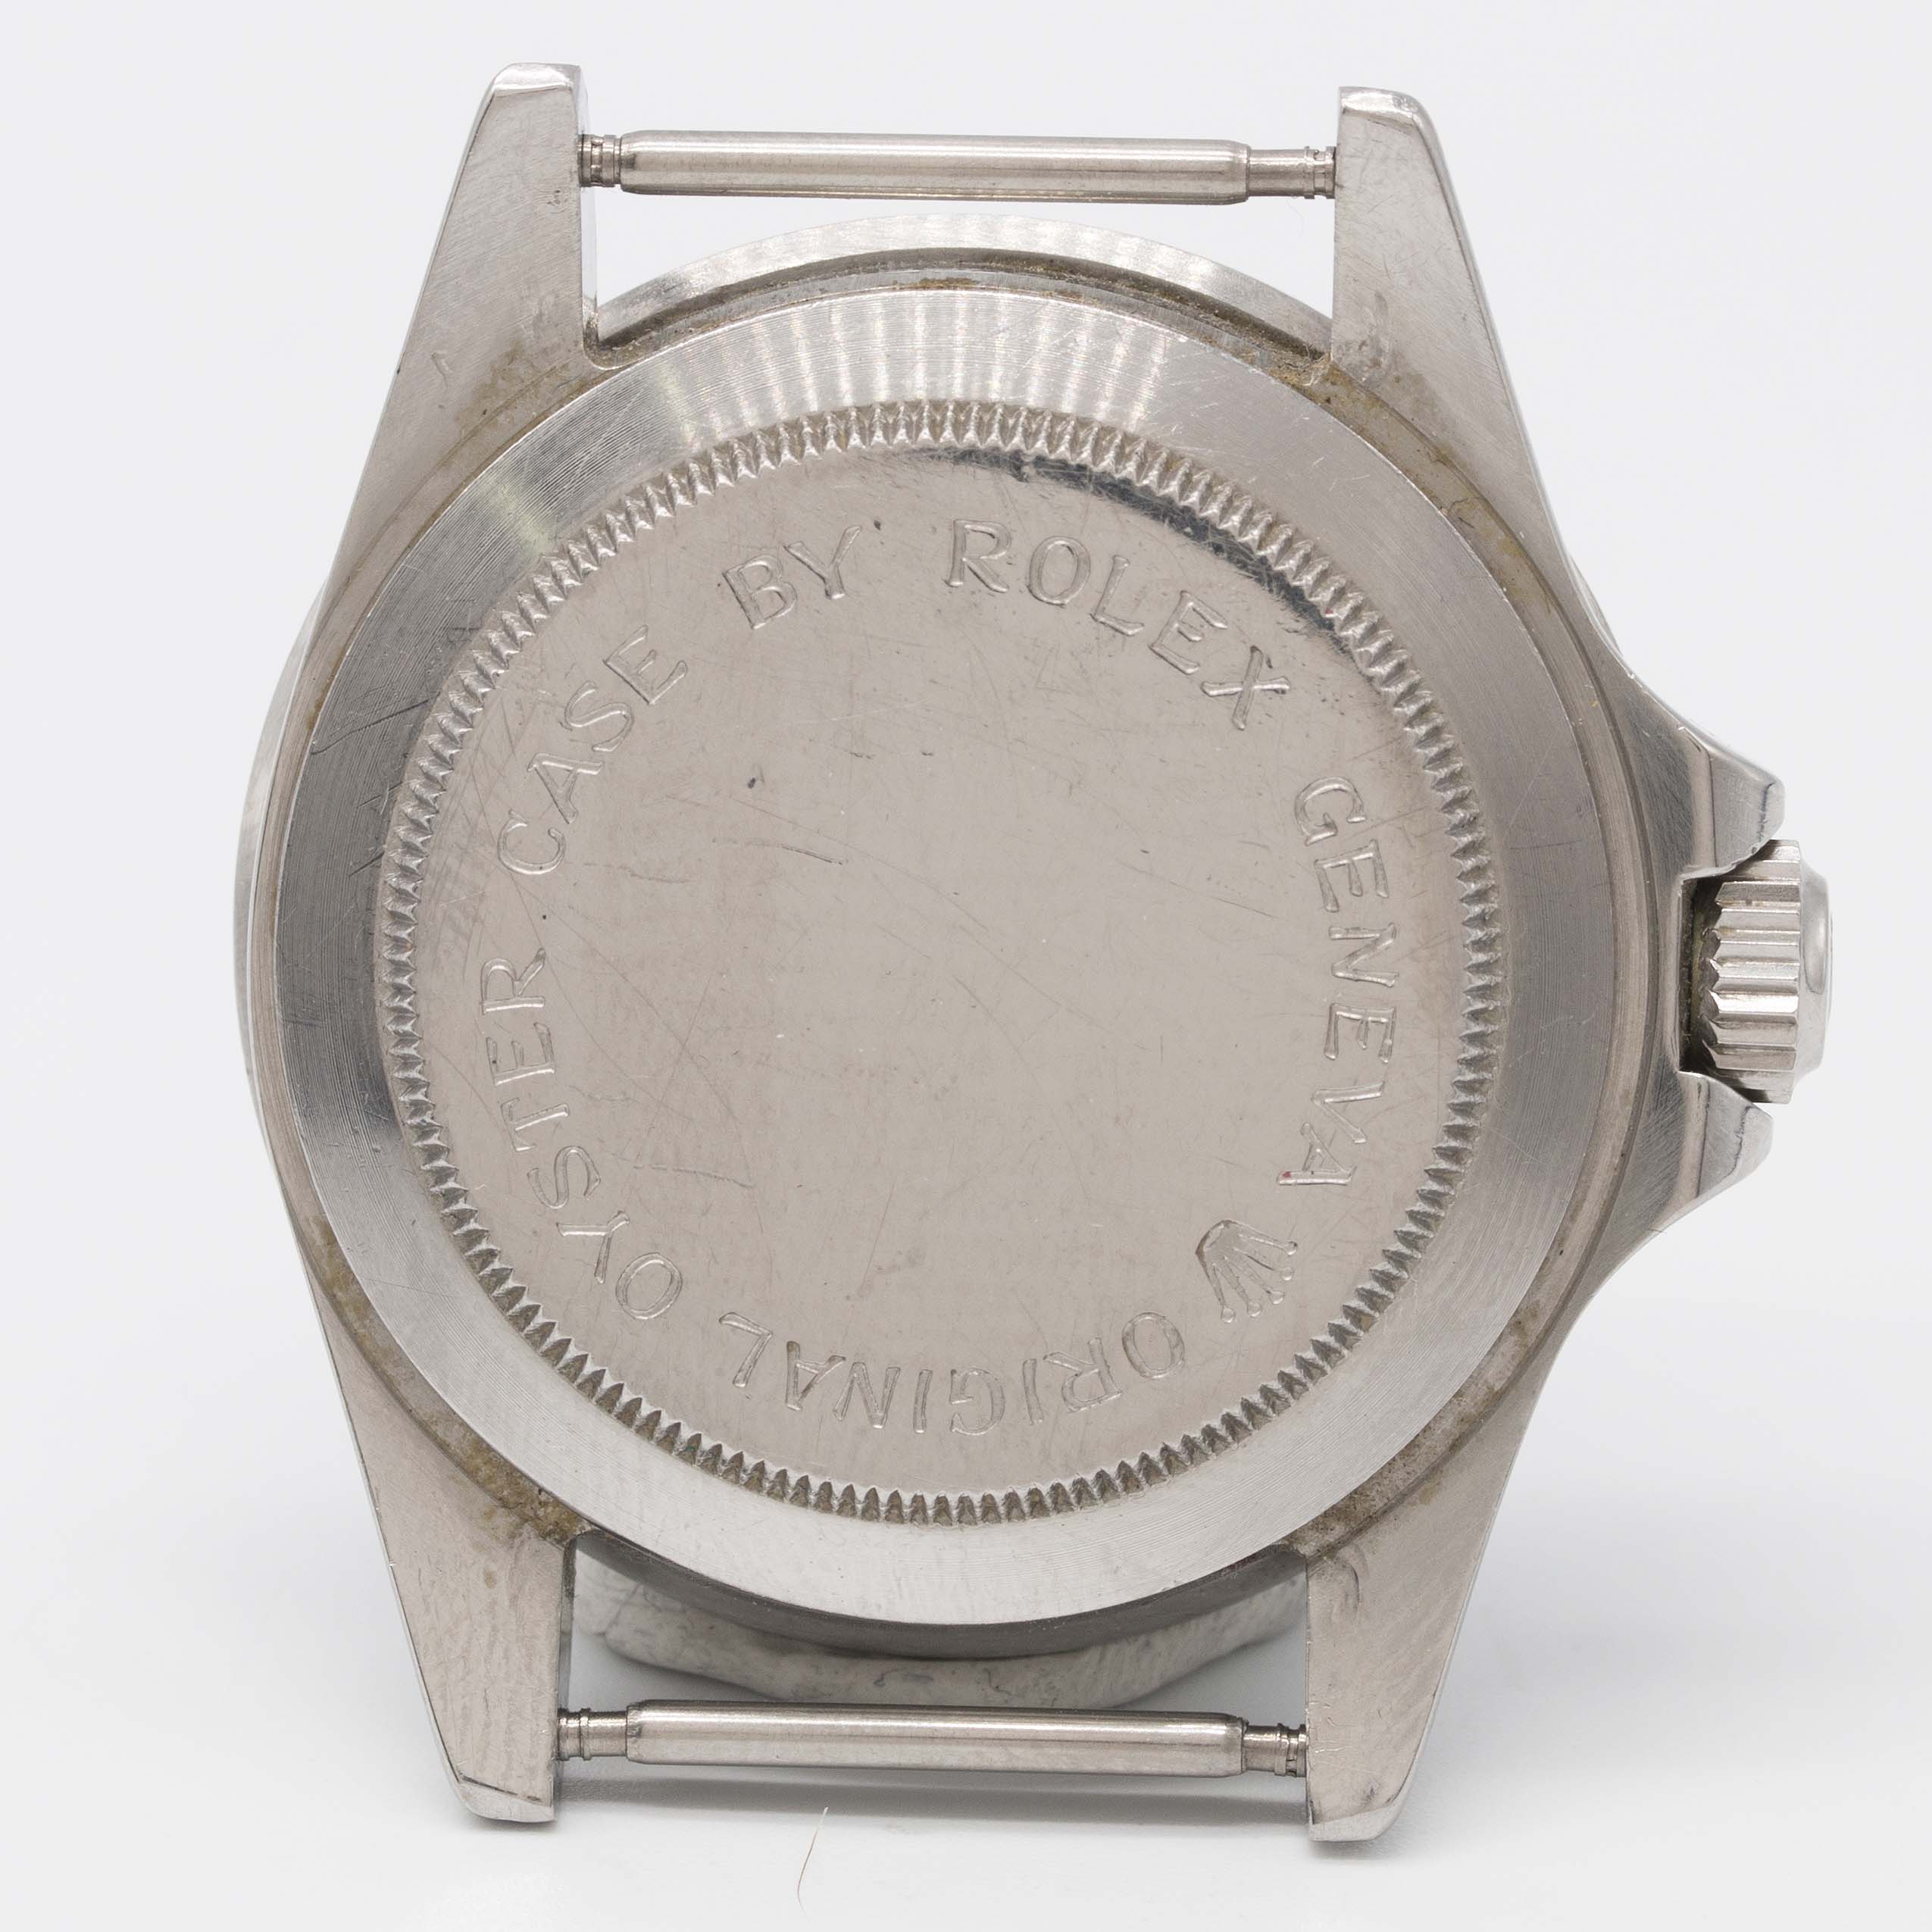 A GENTLEMAN'S STAINLESS STEEL ROLEX TUDOR OYSTER PRINCE SUBMARINER WRIST WATCH CIRCA 1967, REF. - Image 6 of 10